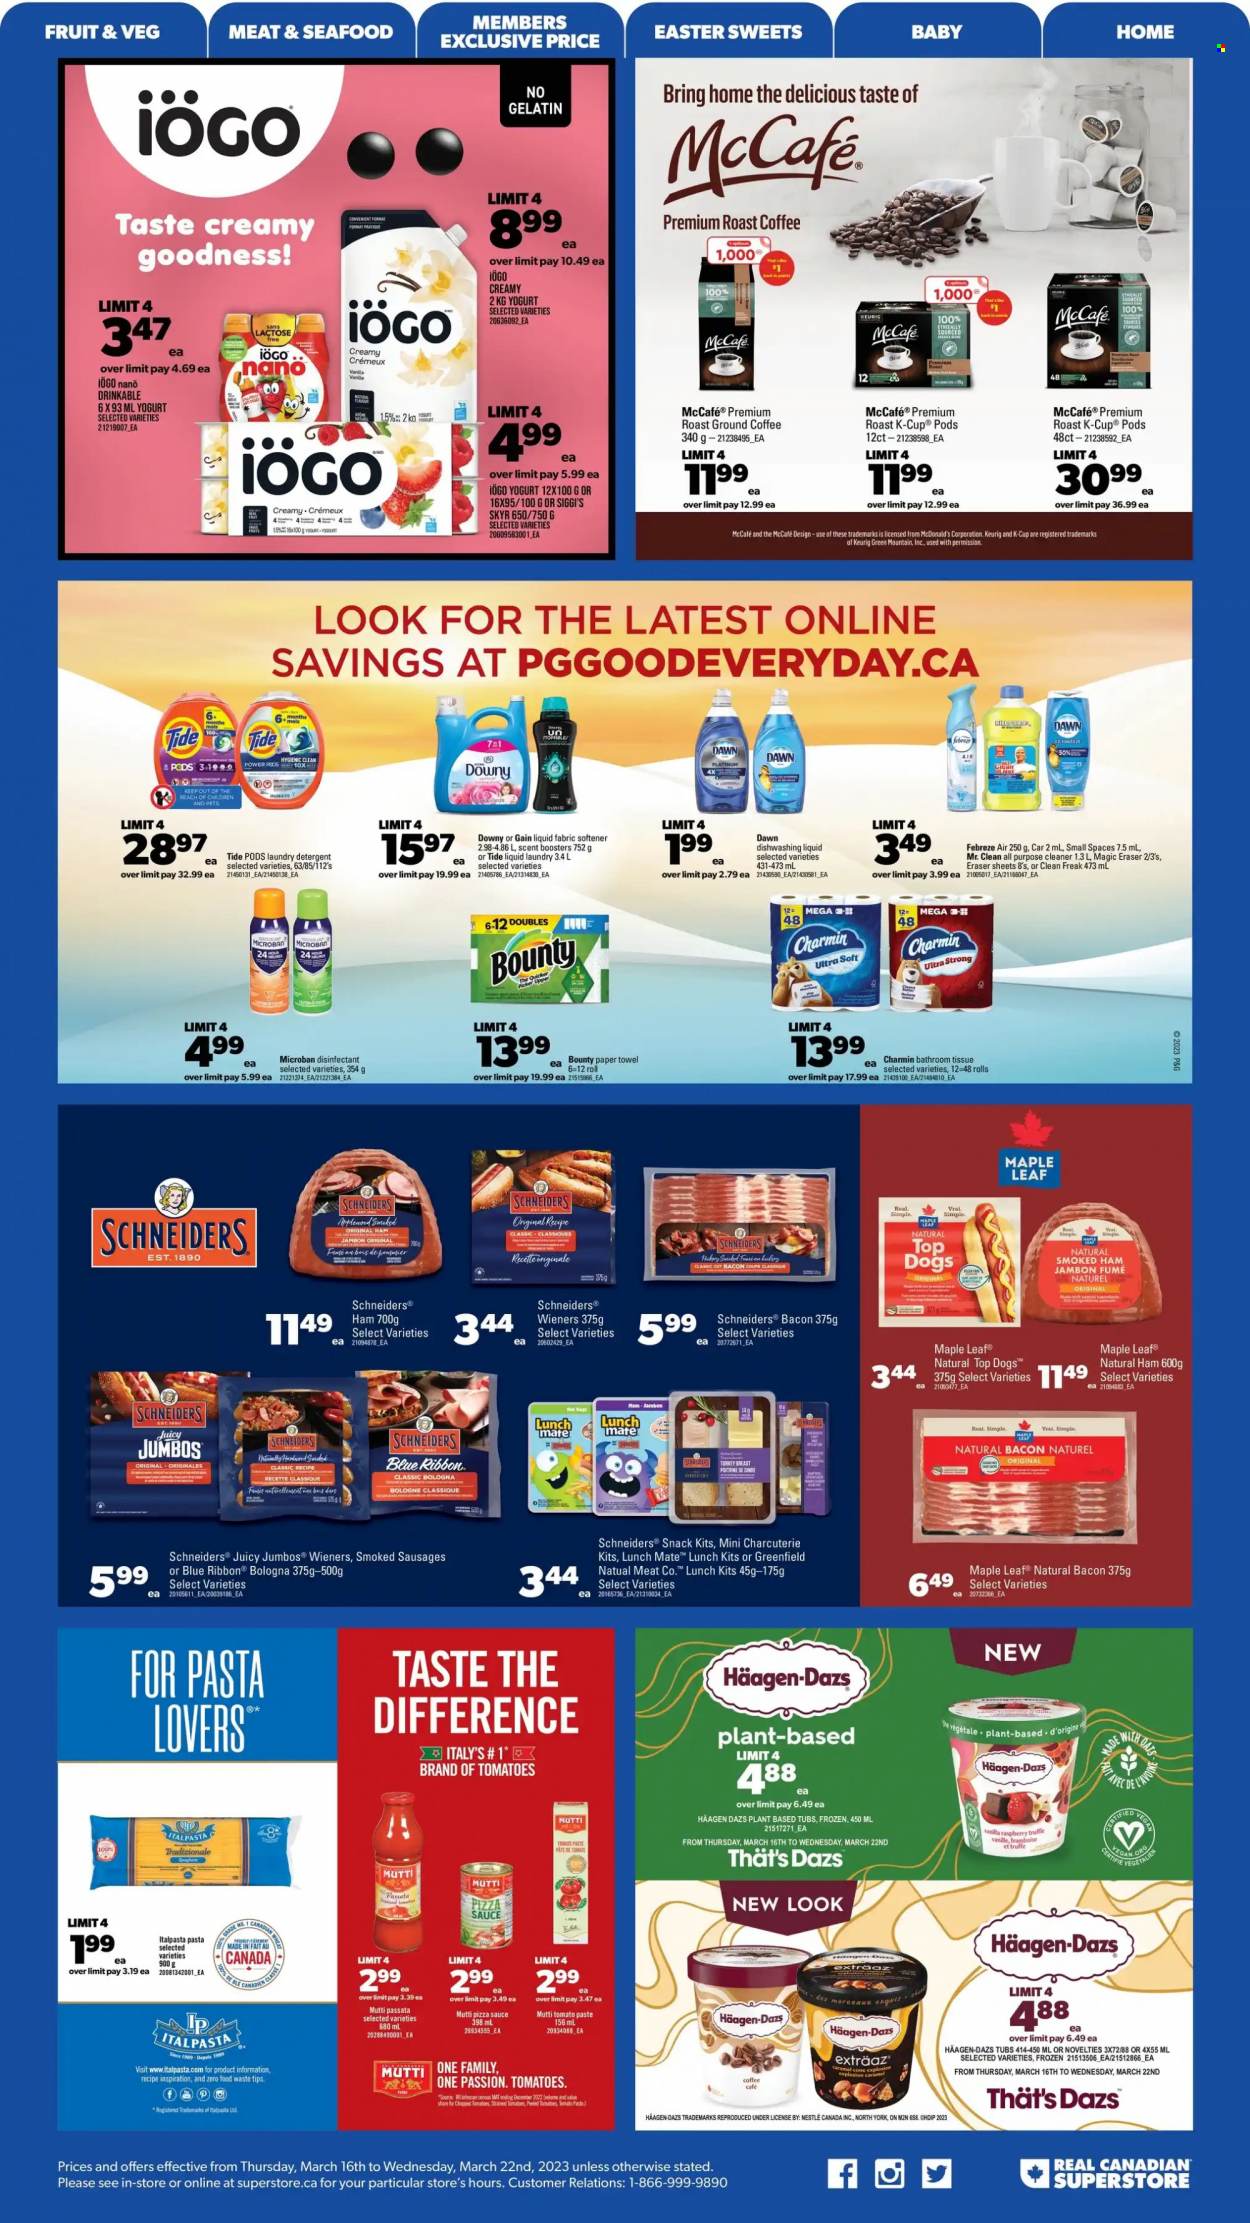 thumbnail - Real Canadian Superstore Flyer - March 16, 2023 - March 22, 2023 - Sales products - Blue Ribbon, seafood, pasta, roast, bacon, ham, smoked ham, bologna sausage, sausage, yoghurt, Häagen-Dazs, snack, Bounty, truffles, coffee, ground coffee, coffee capsules, McCafe, K-Cups, Keurig, Green Mountain, bath tissue, paper towels, Charmin, Febreze, Gain, cleaner, all purpose cleaner, Tide, fabric softener, laundry detergent, scent booster, dishwashing liquid, eraser, gelatin, detergent, Nestlé, desinfection. Page 20.